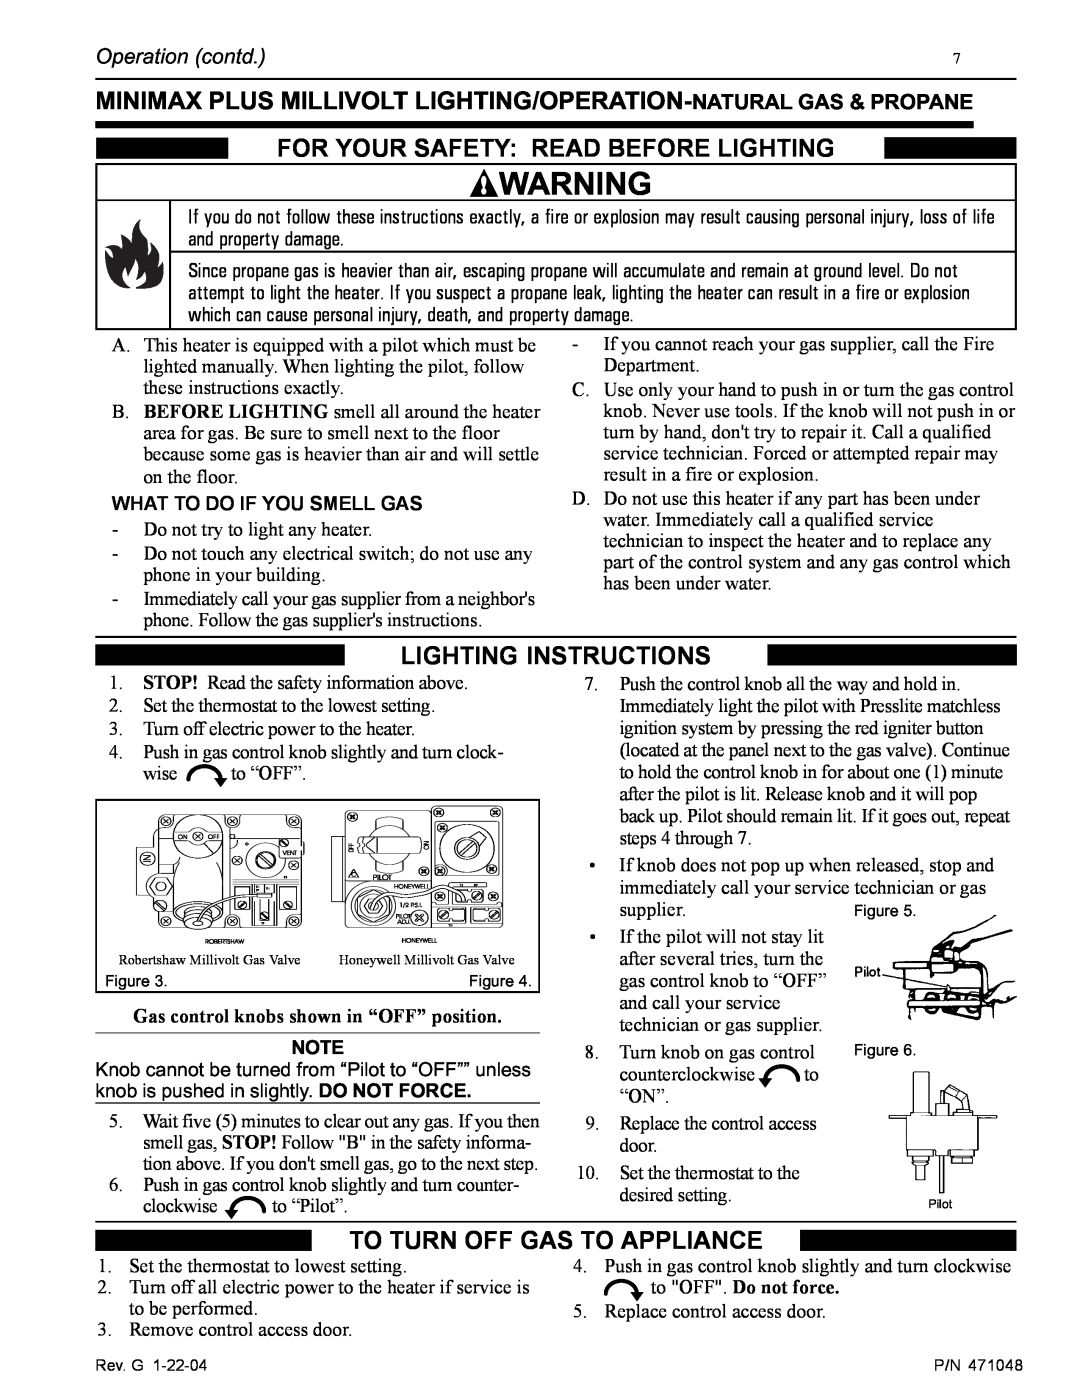 Pentair 100 Lighting Instructions, For Your Safety Read Before Lighting, To Turn Off Gas To Appliance, Operation contd 